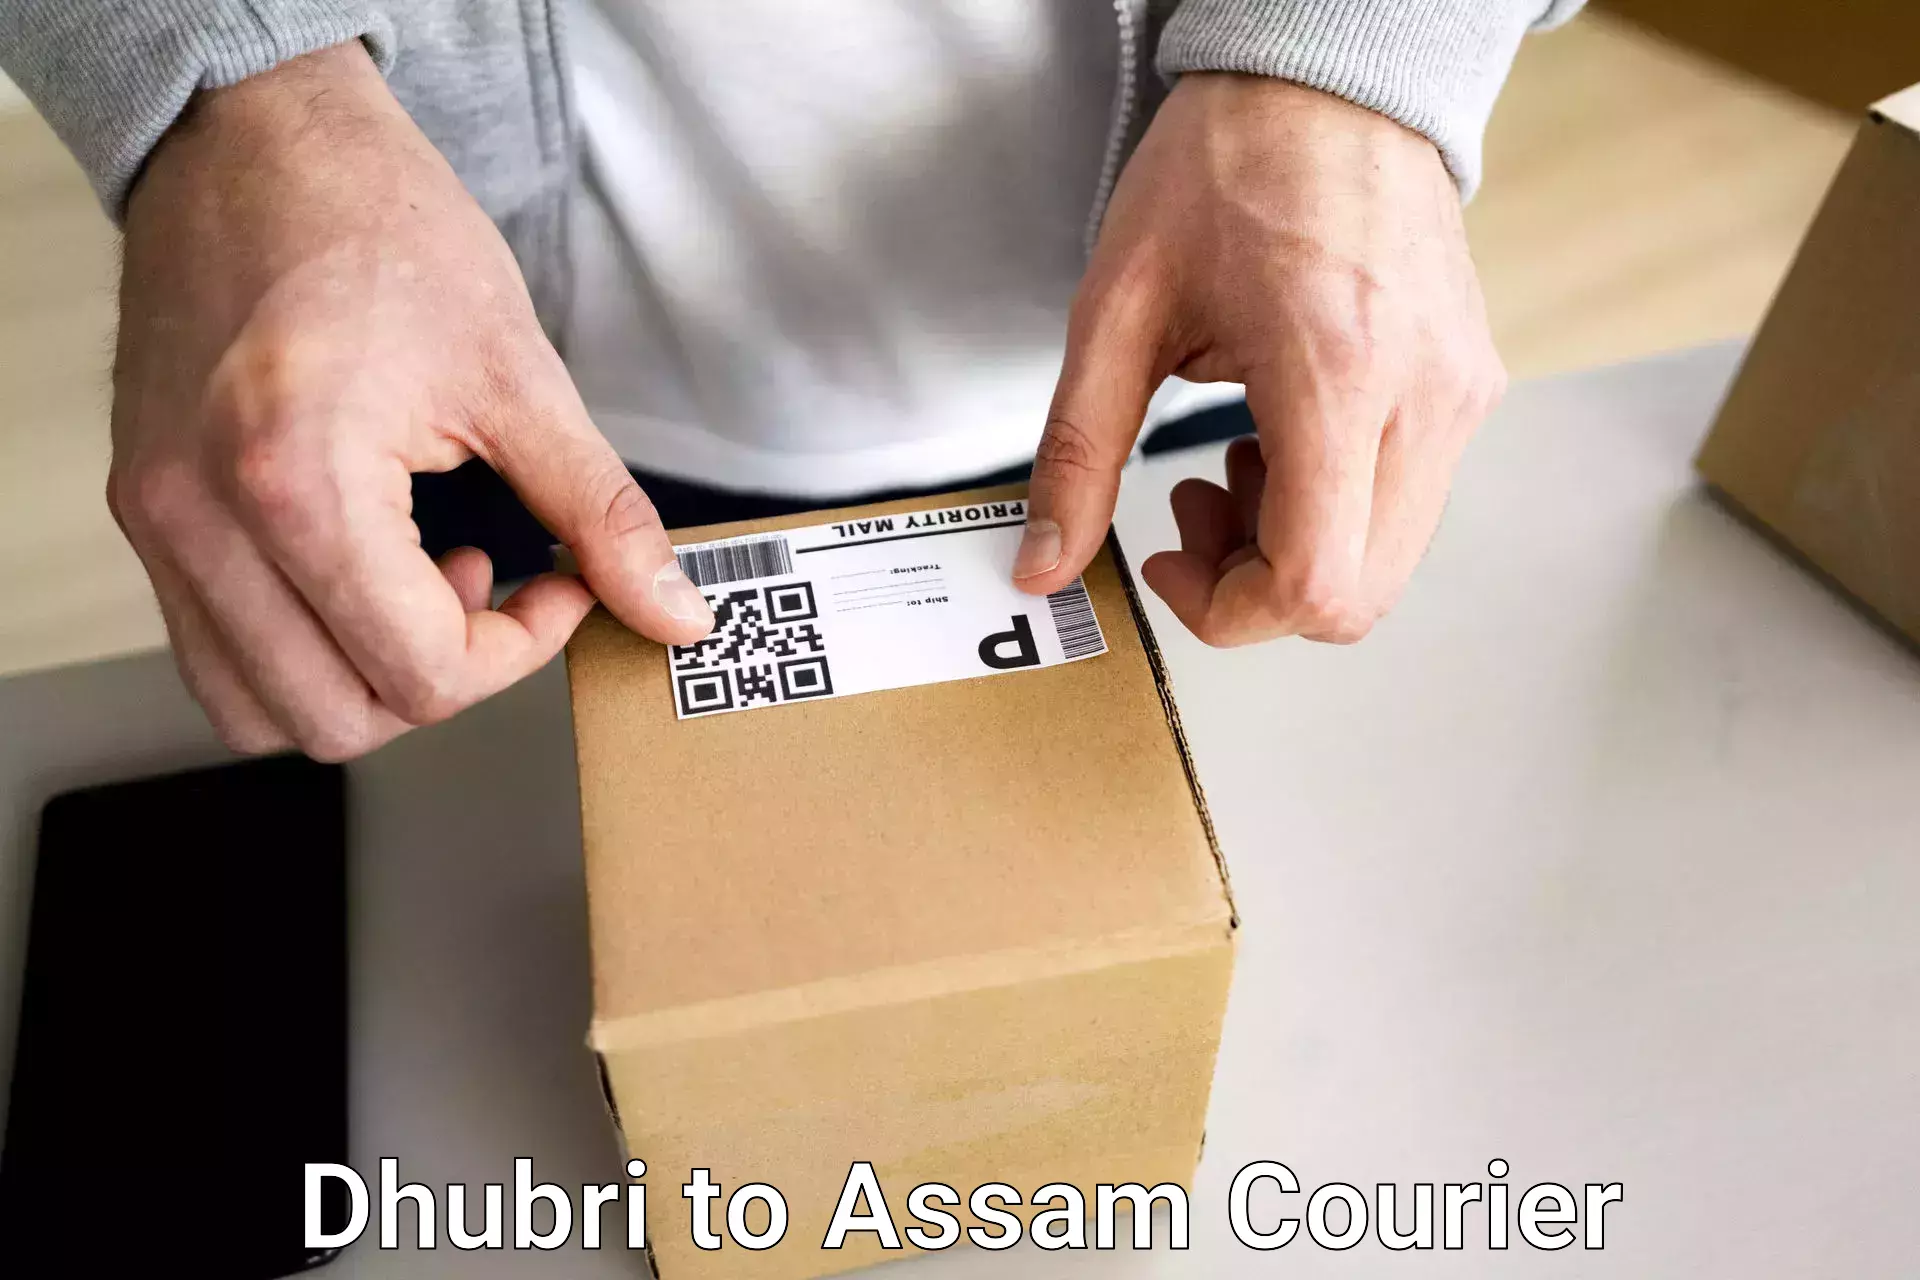 Personal effects shipping Dhubri to Silchar